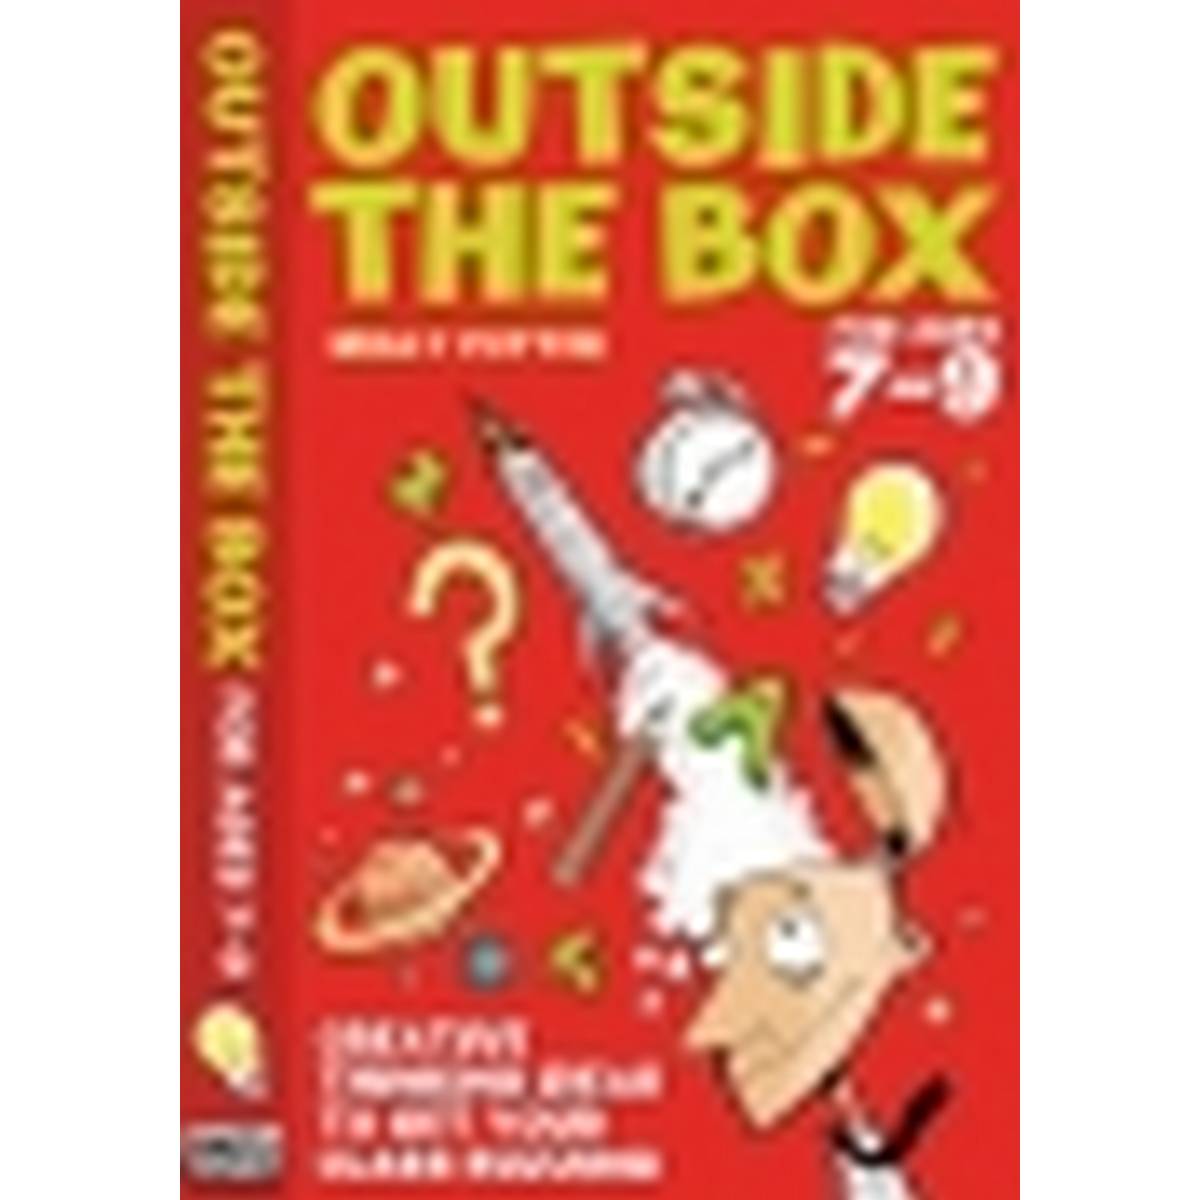 Outside the Box Ages 7-9 (Inspirational Ideas)